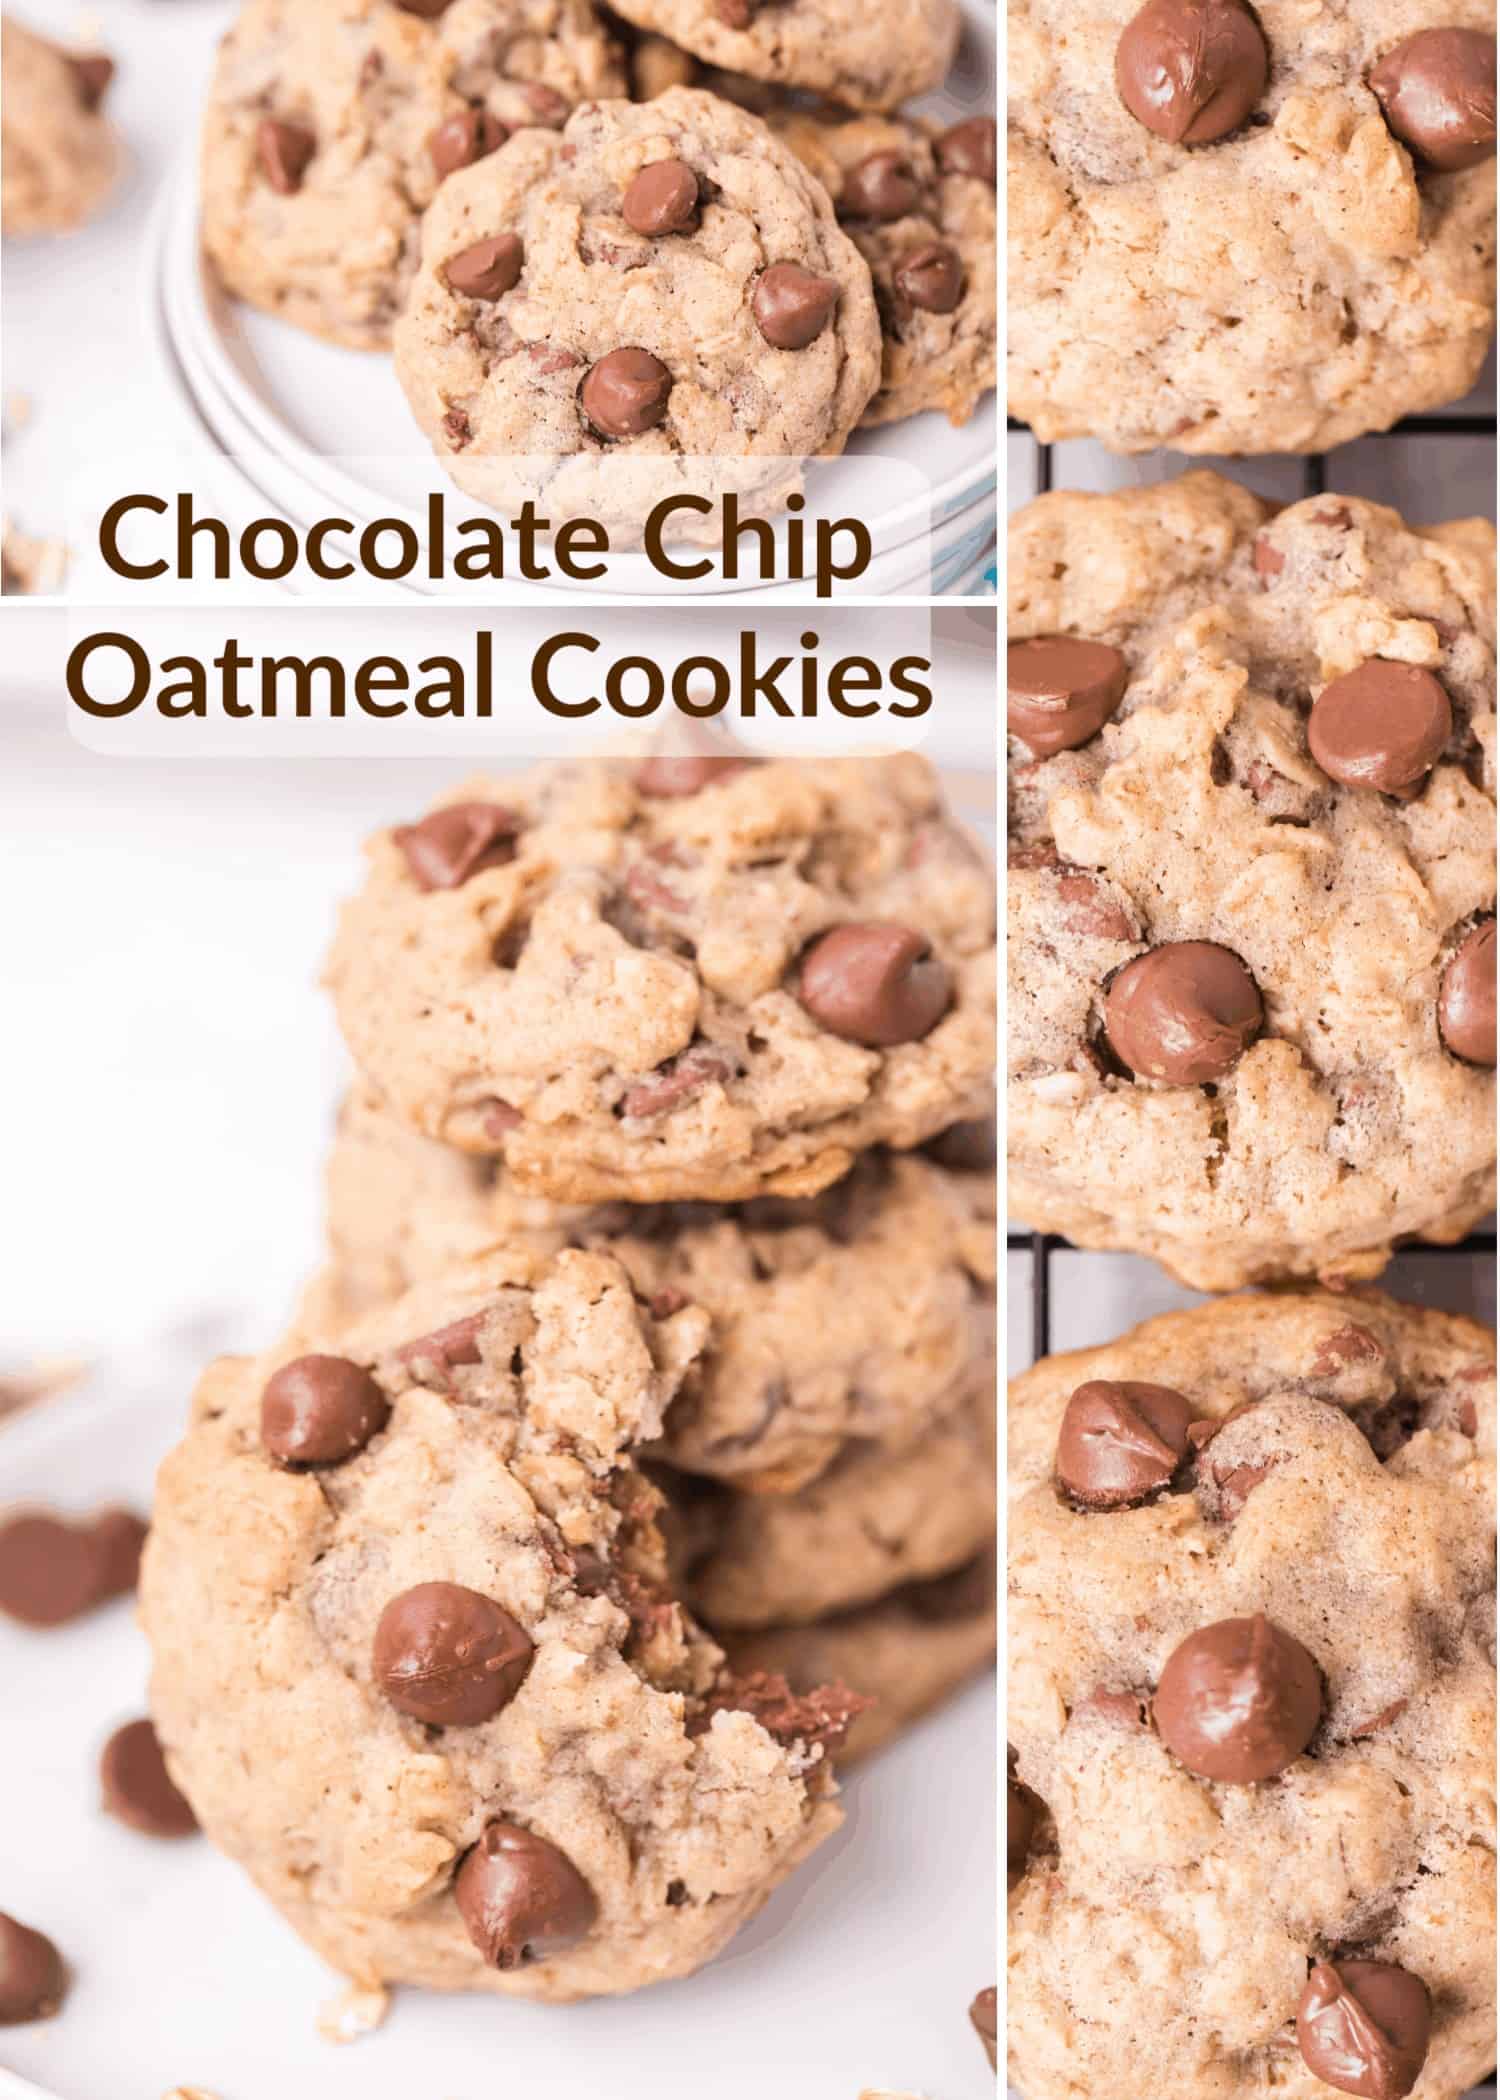 These Chocolate Chip Oatmeal Cookies are seriously the most delicious, best cookies hands down. A glass of milk and a couple of these yummy cookies are a wonderful treat. via @Mooreorlesscook